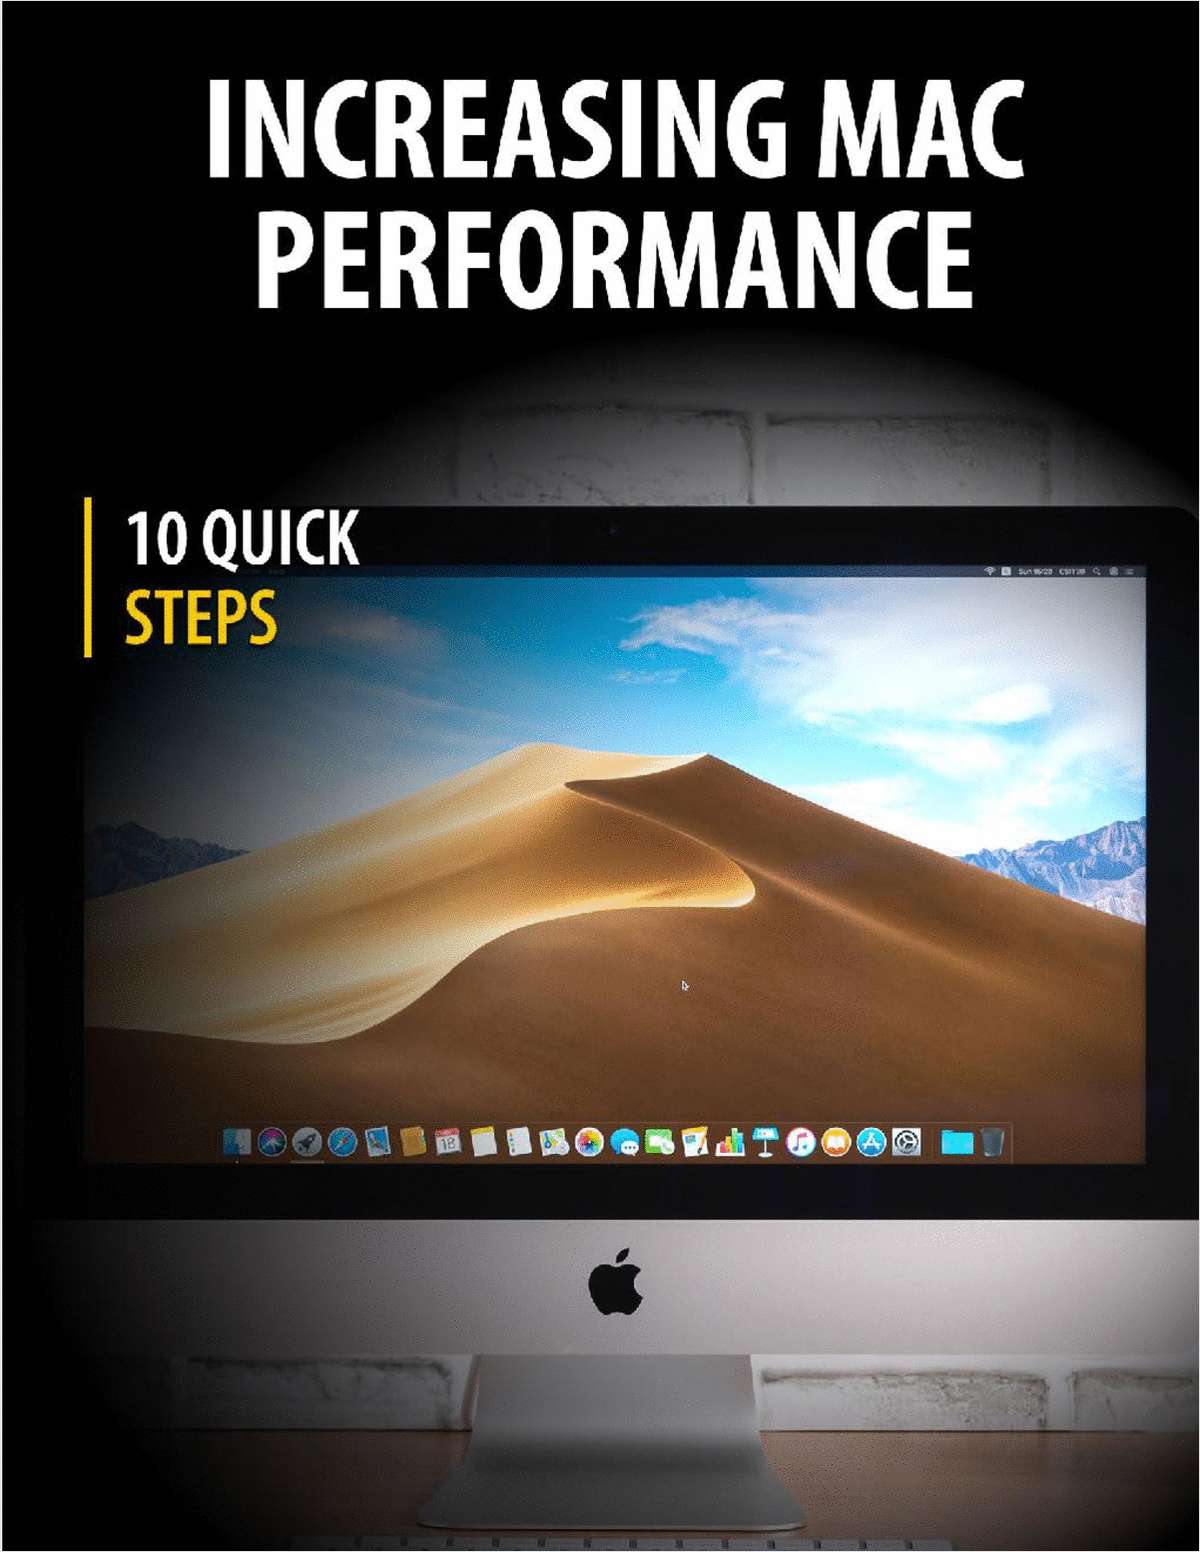 10 Quick Steps to Increase Mac Performance